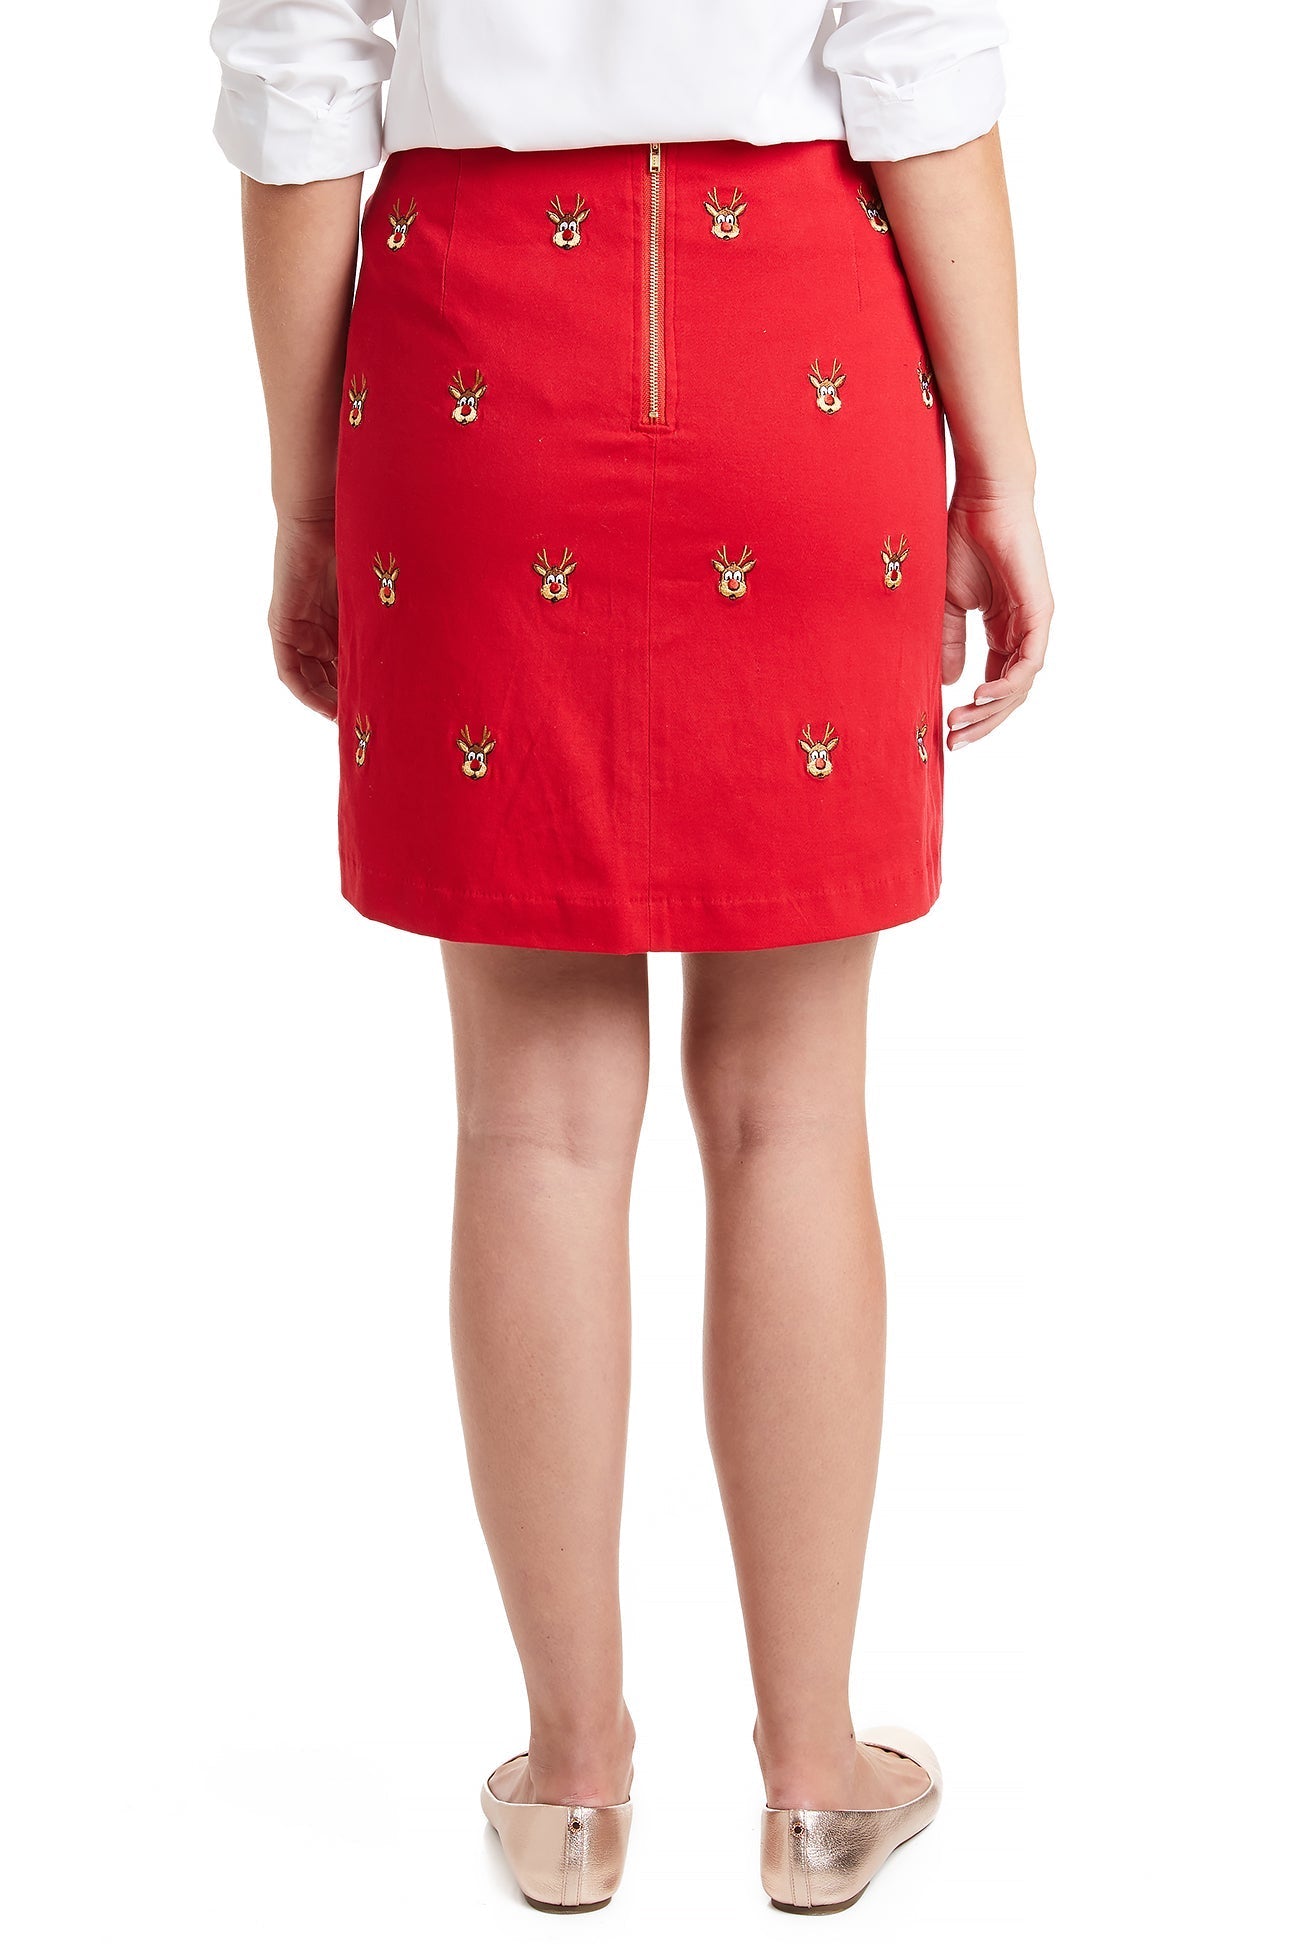 Ali Skirt Stretch Twill Bright Red with Rudolph LADIES SKIRTS Castaway Nantucket Island